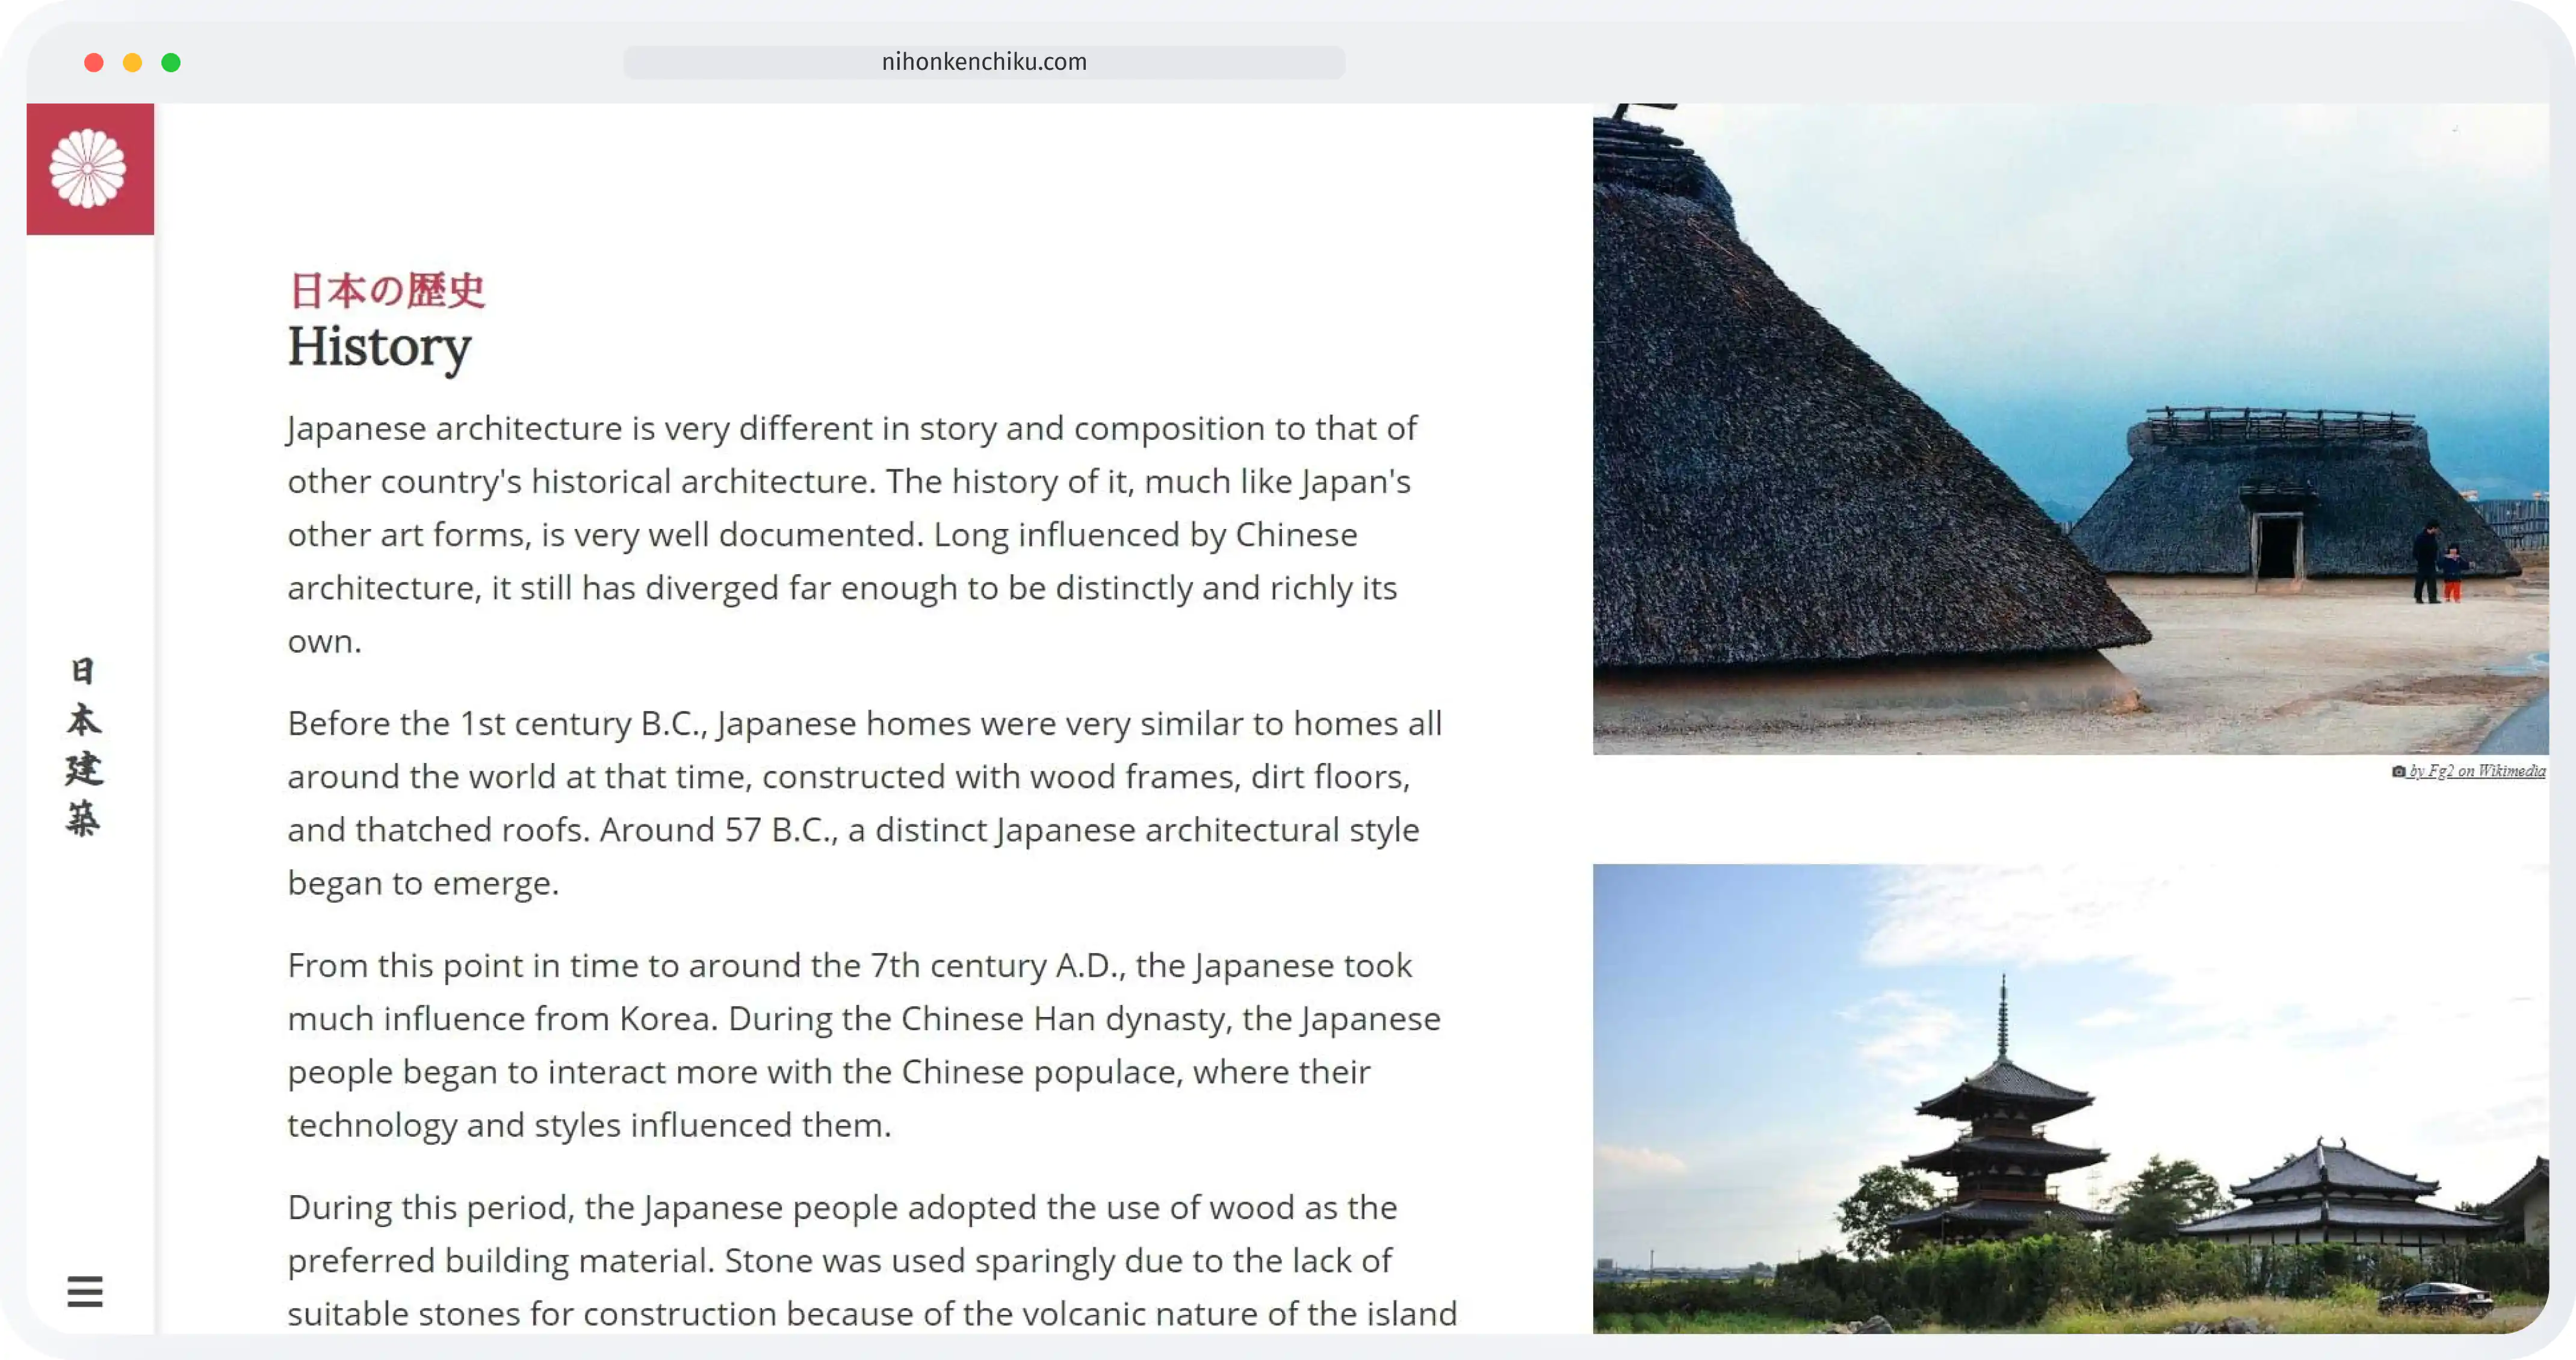 Image of a webpage with information about Japanese history